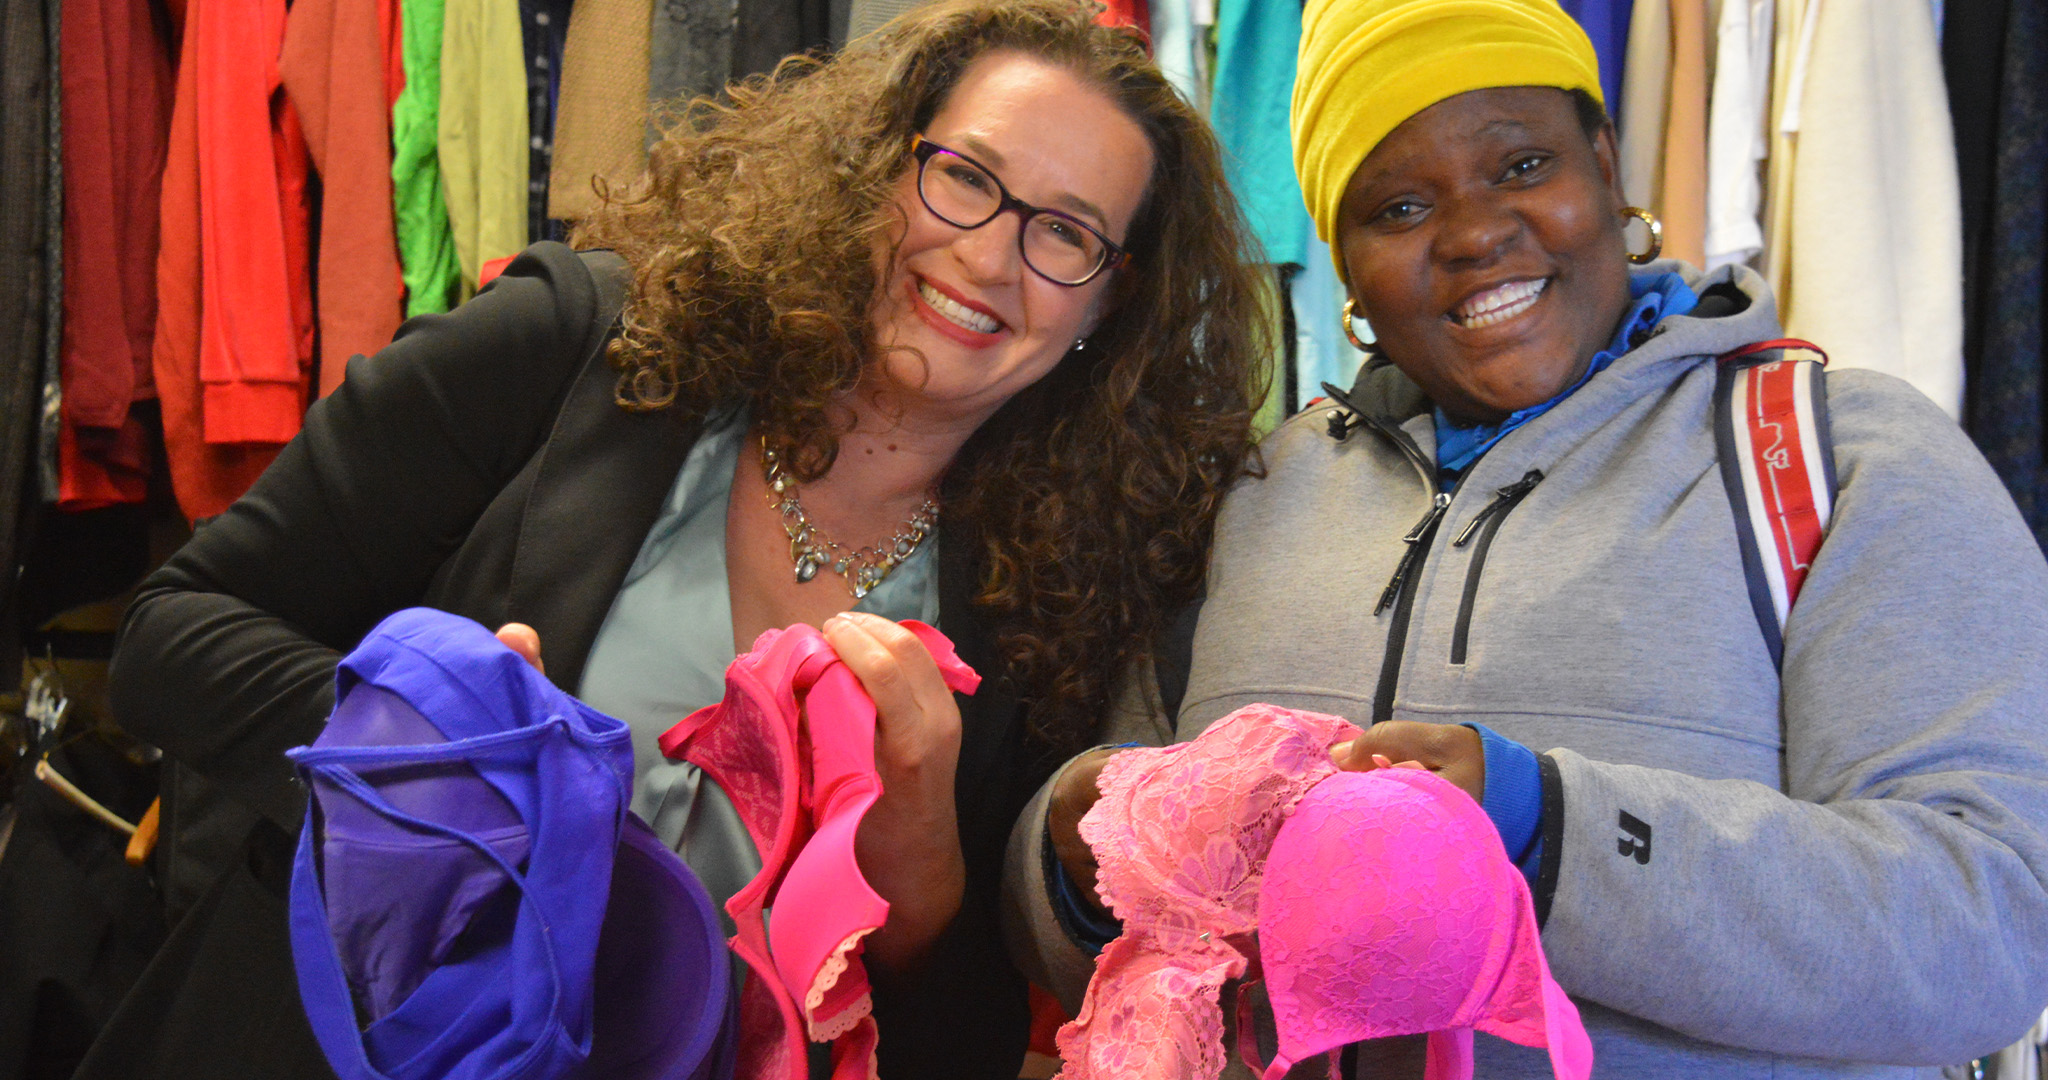 Maurices accepting donations of new, gently used bras, Gaz